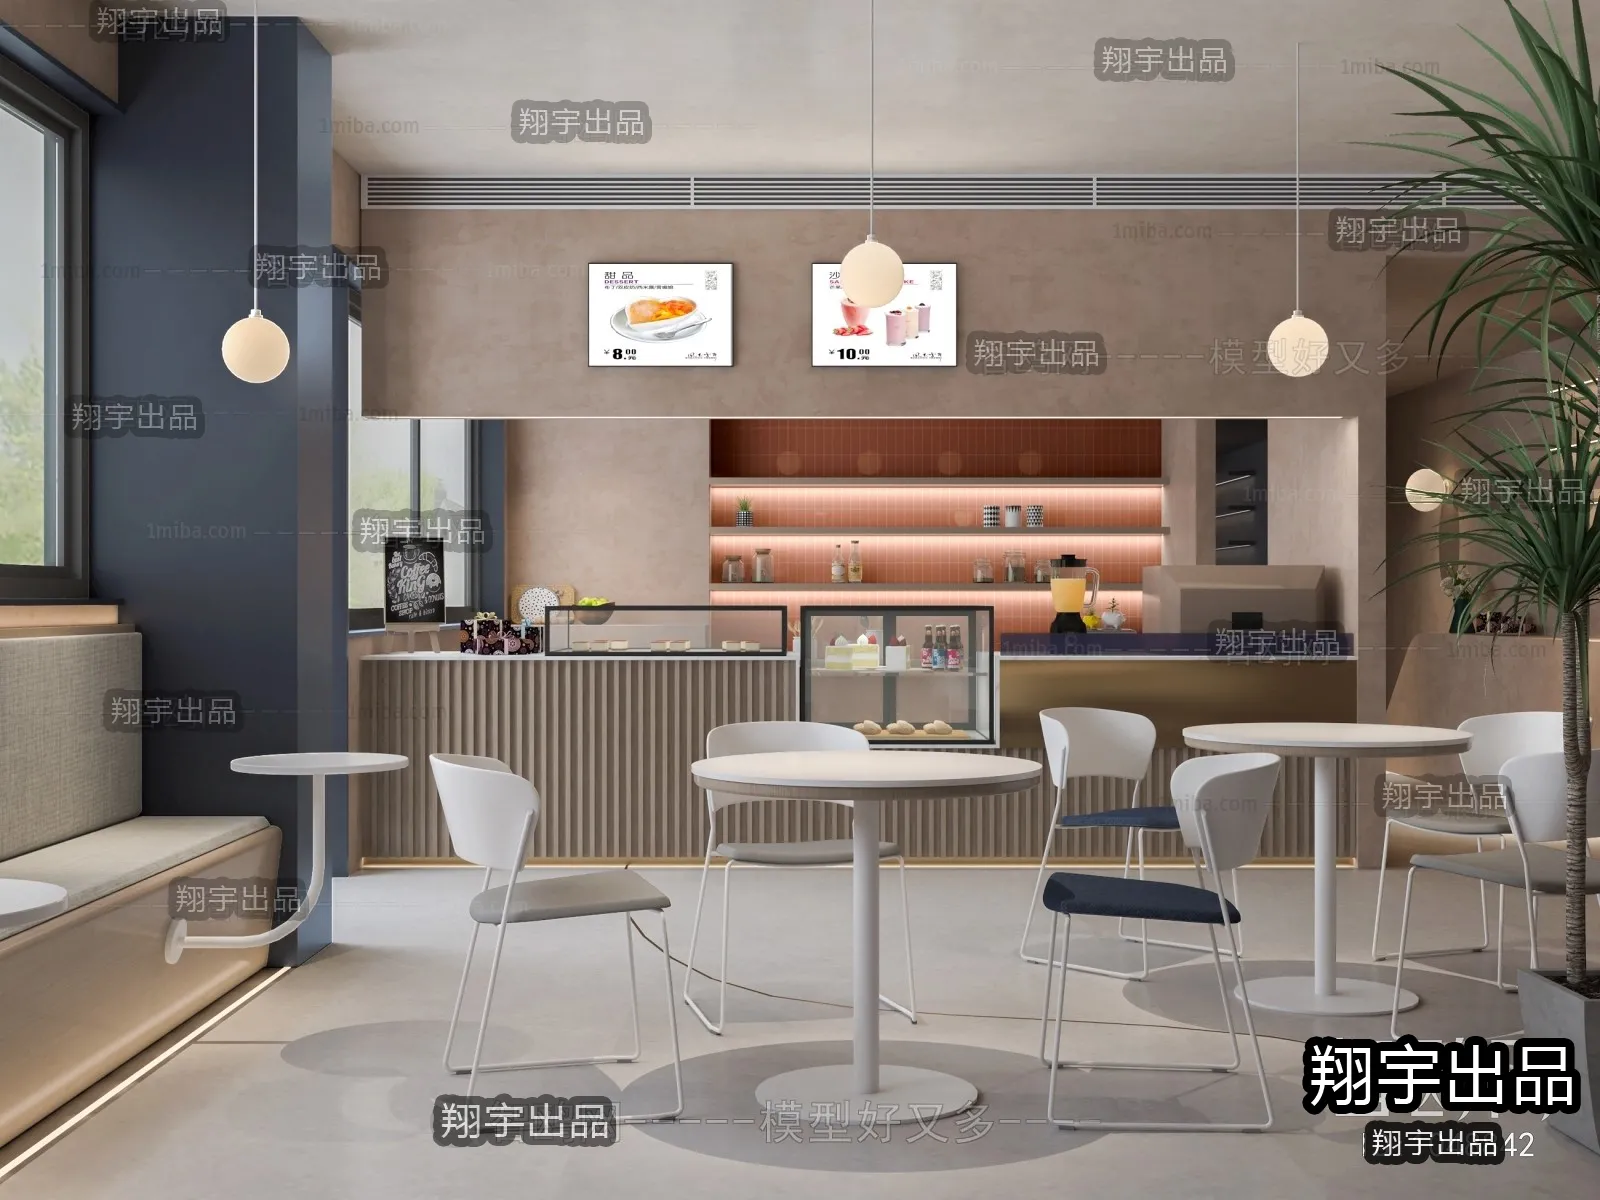 FASTFOOD STORE – 3D SCENES – 0127